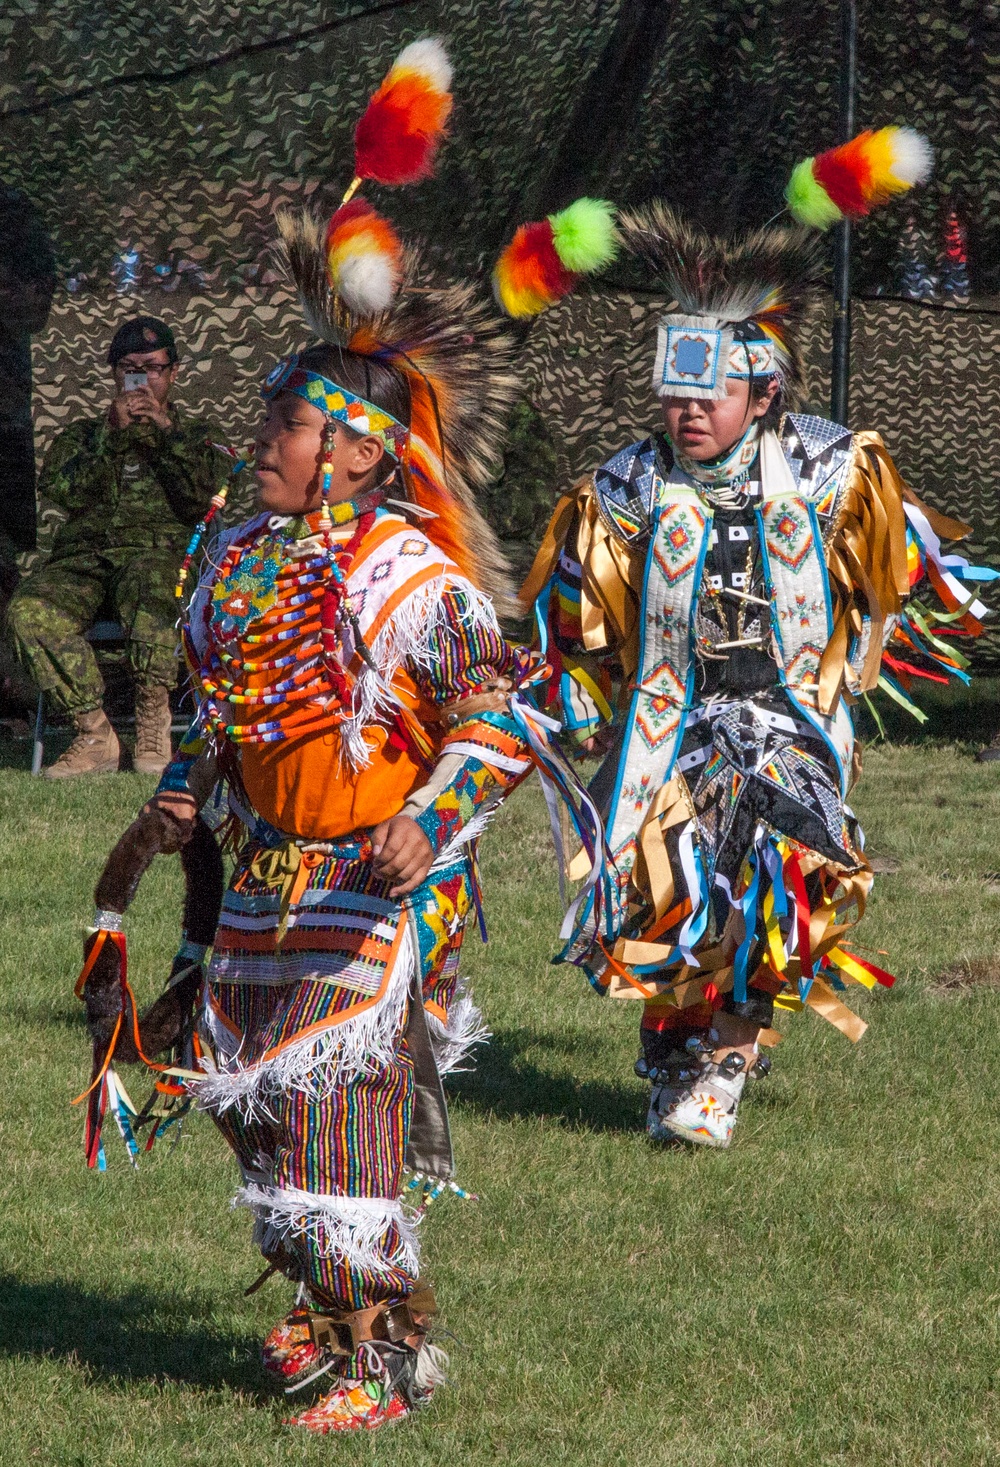 SD National Guard concludes training exercise with Native American Cultural Day